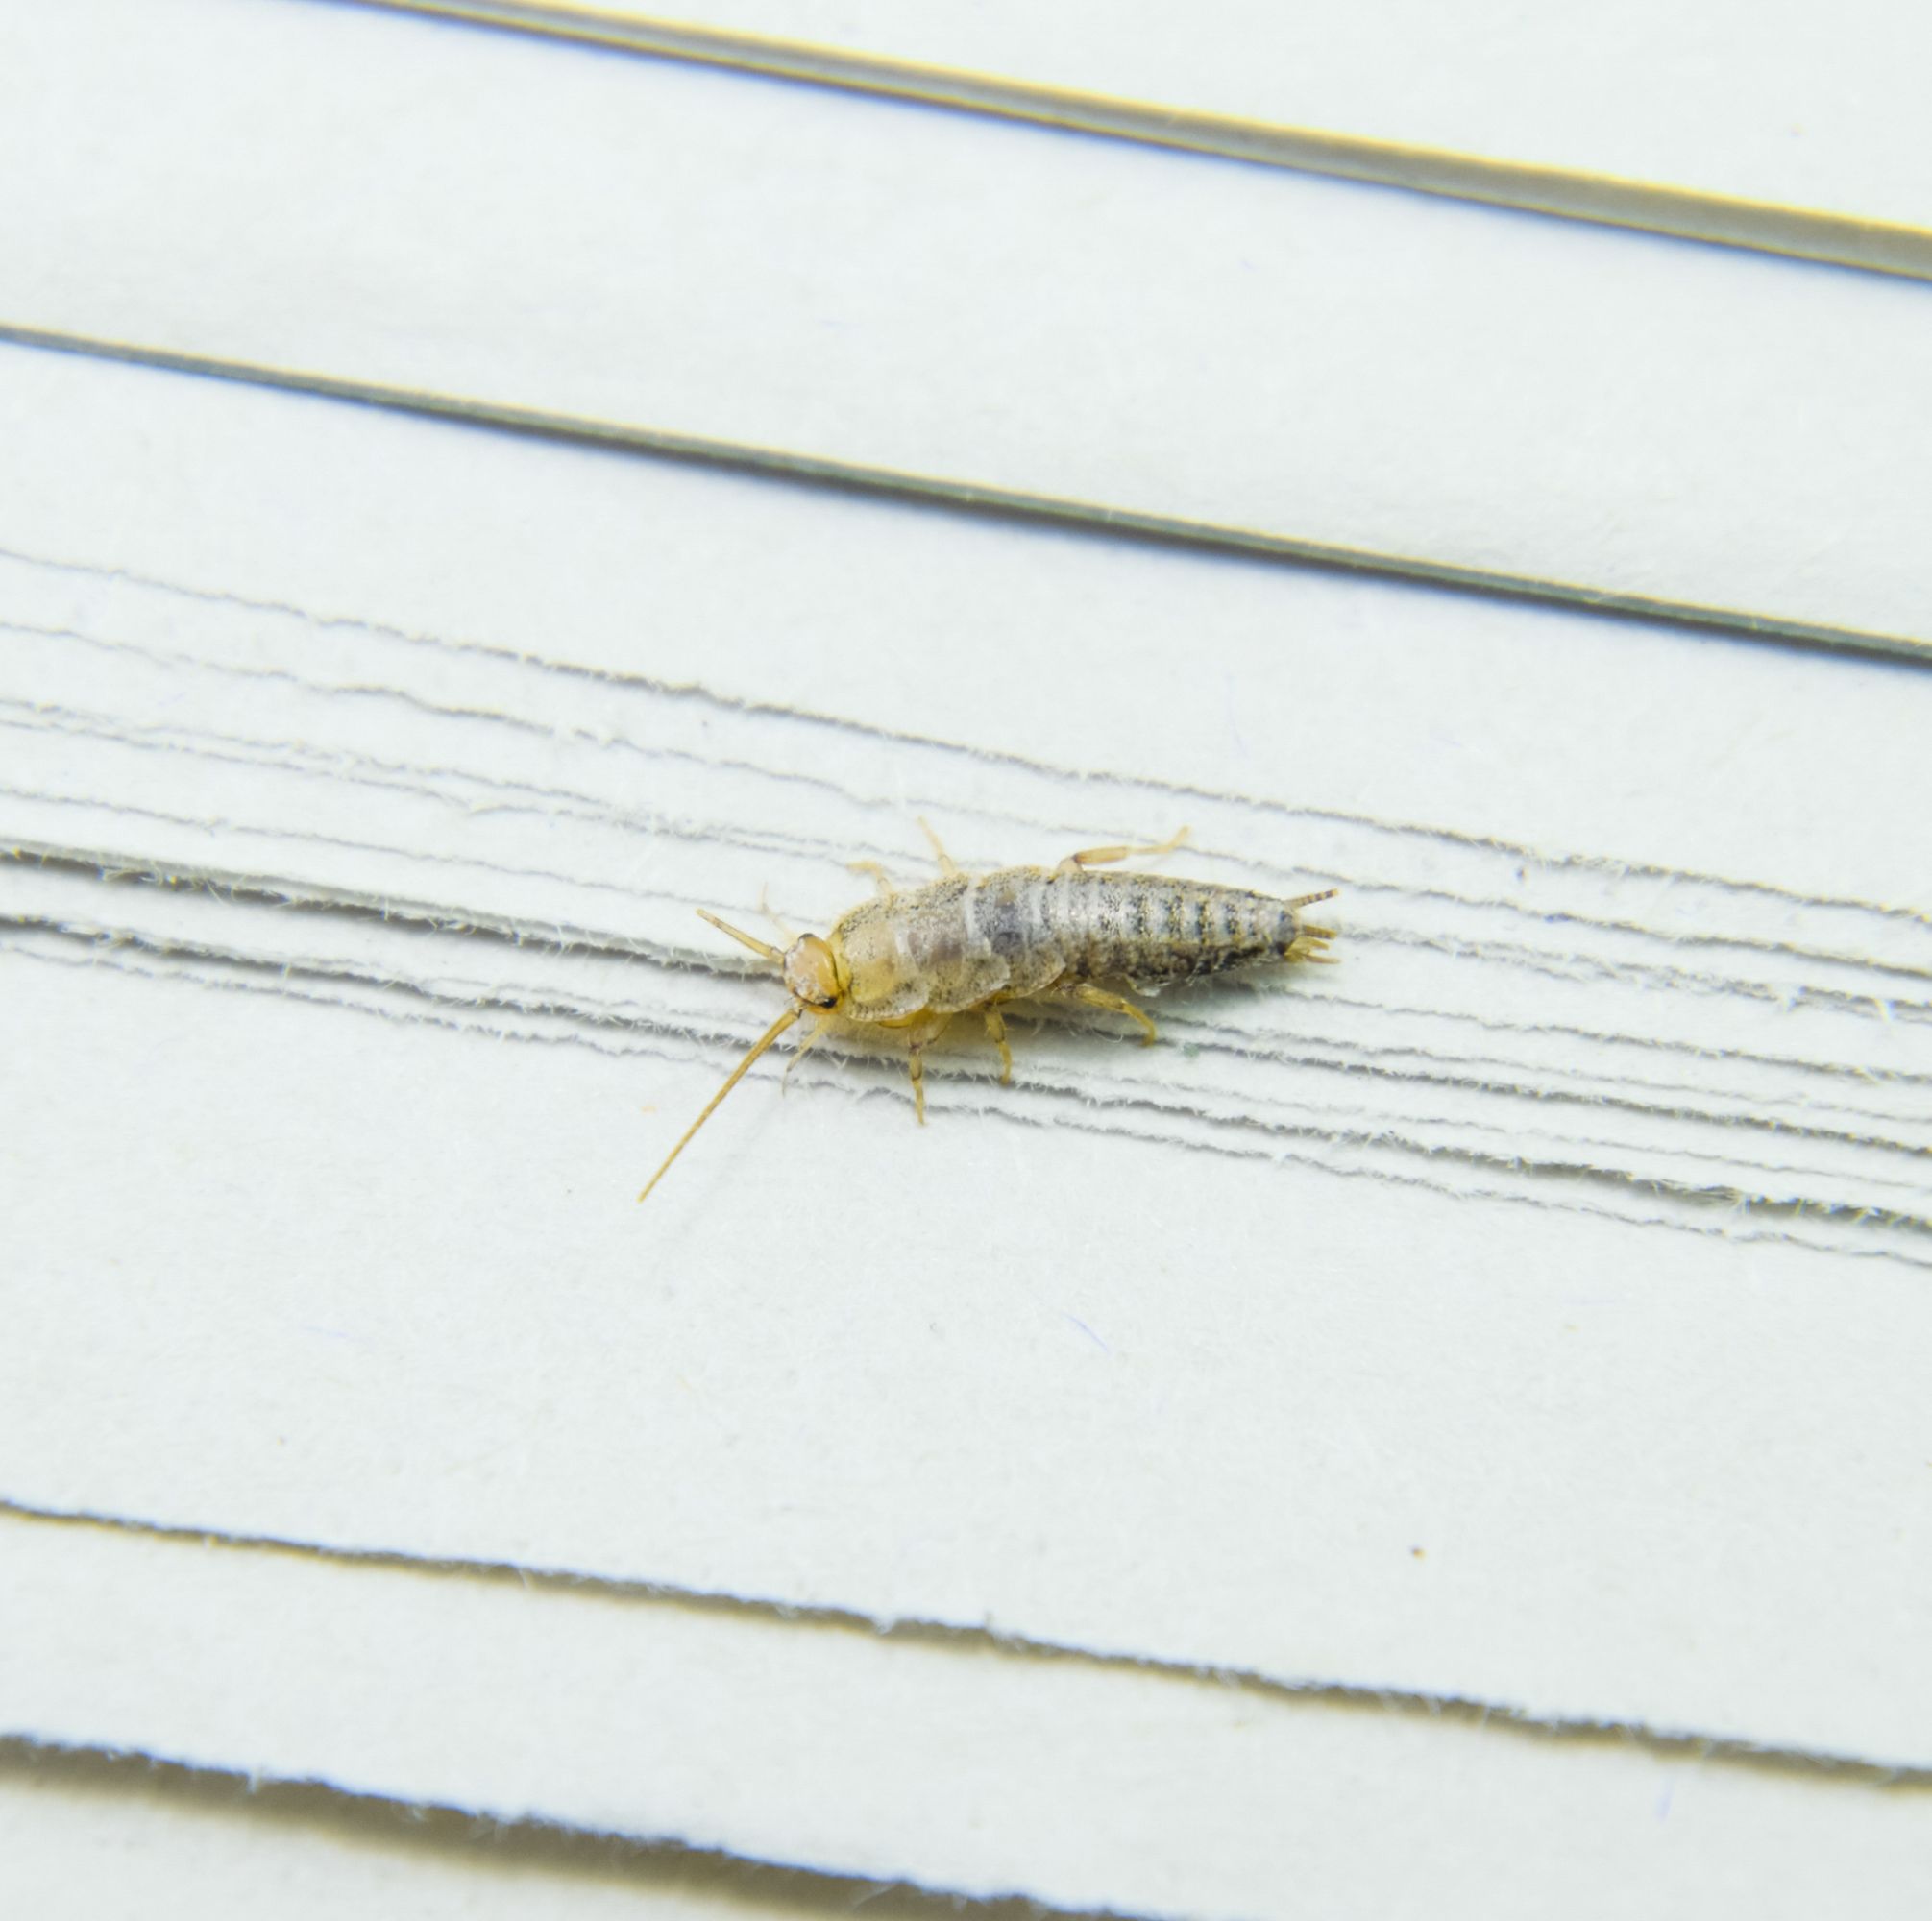 How To Get Rid Of Silverfish – What Naturally Kills Silverfish?